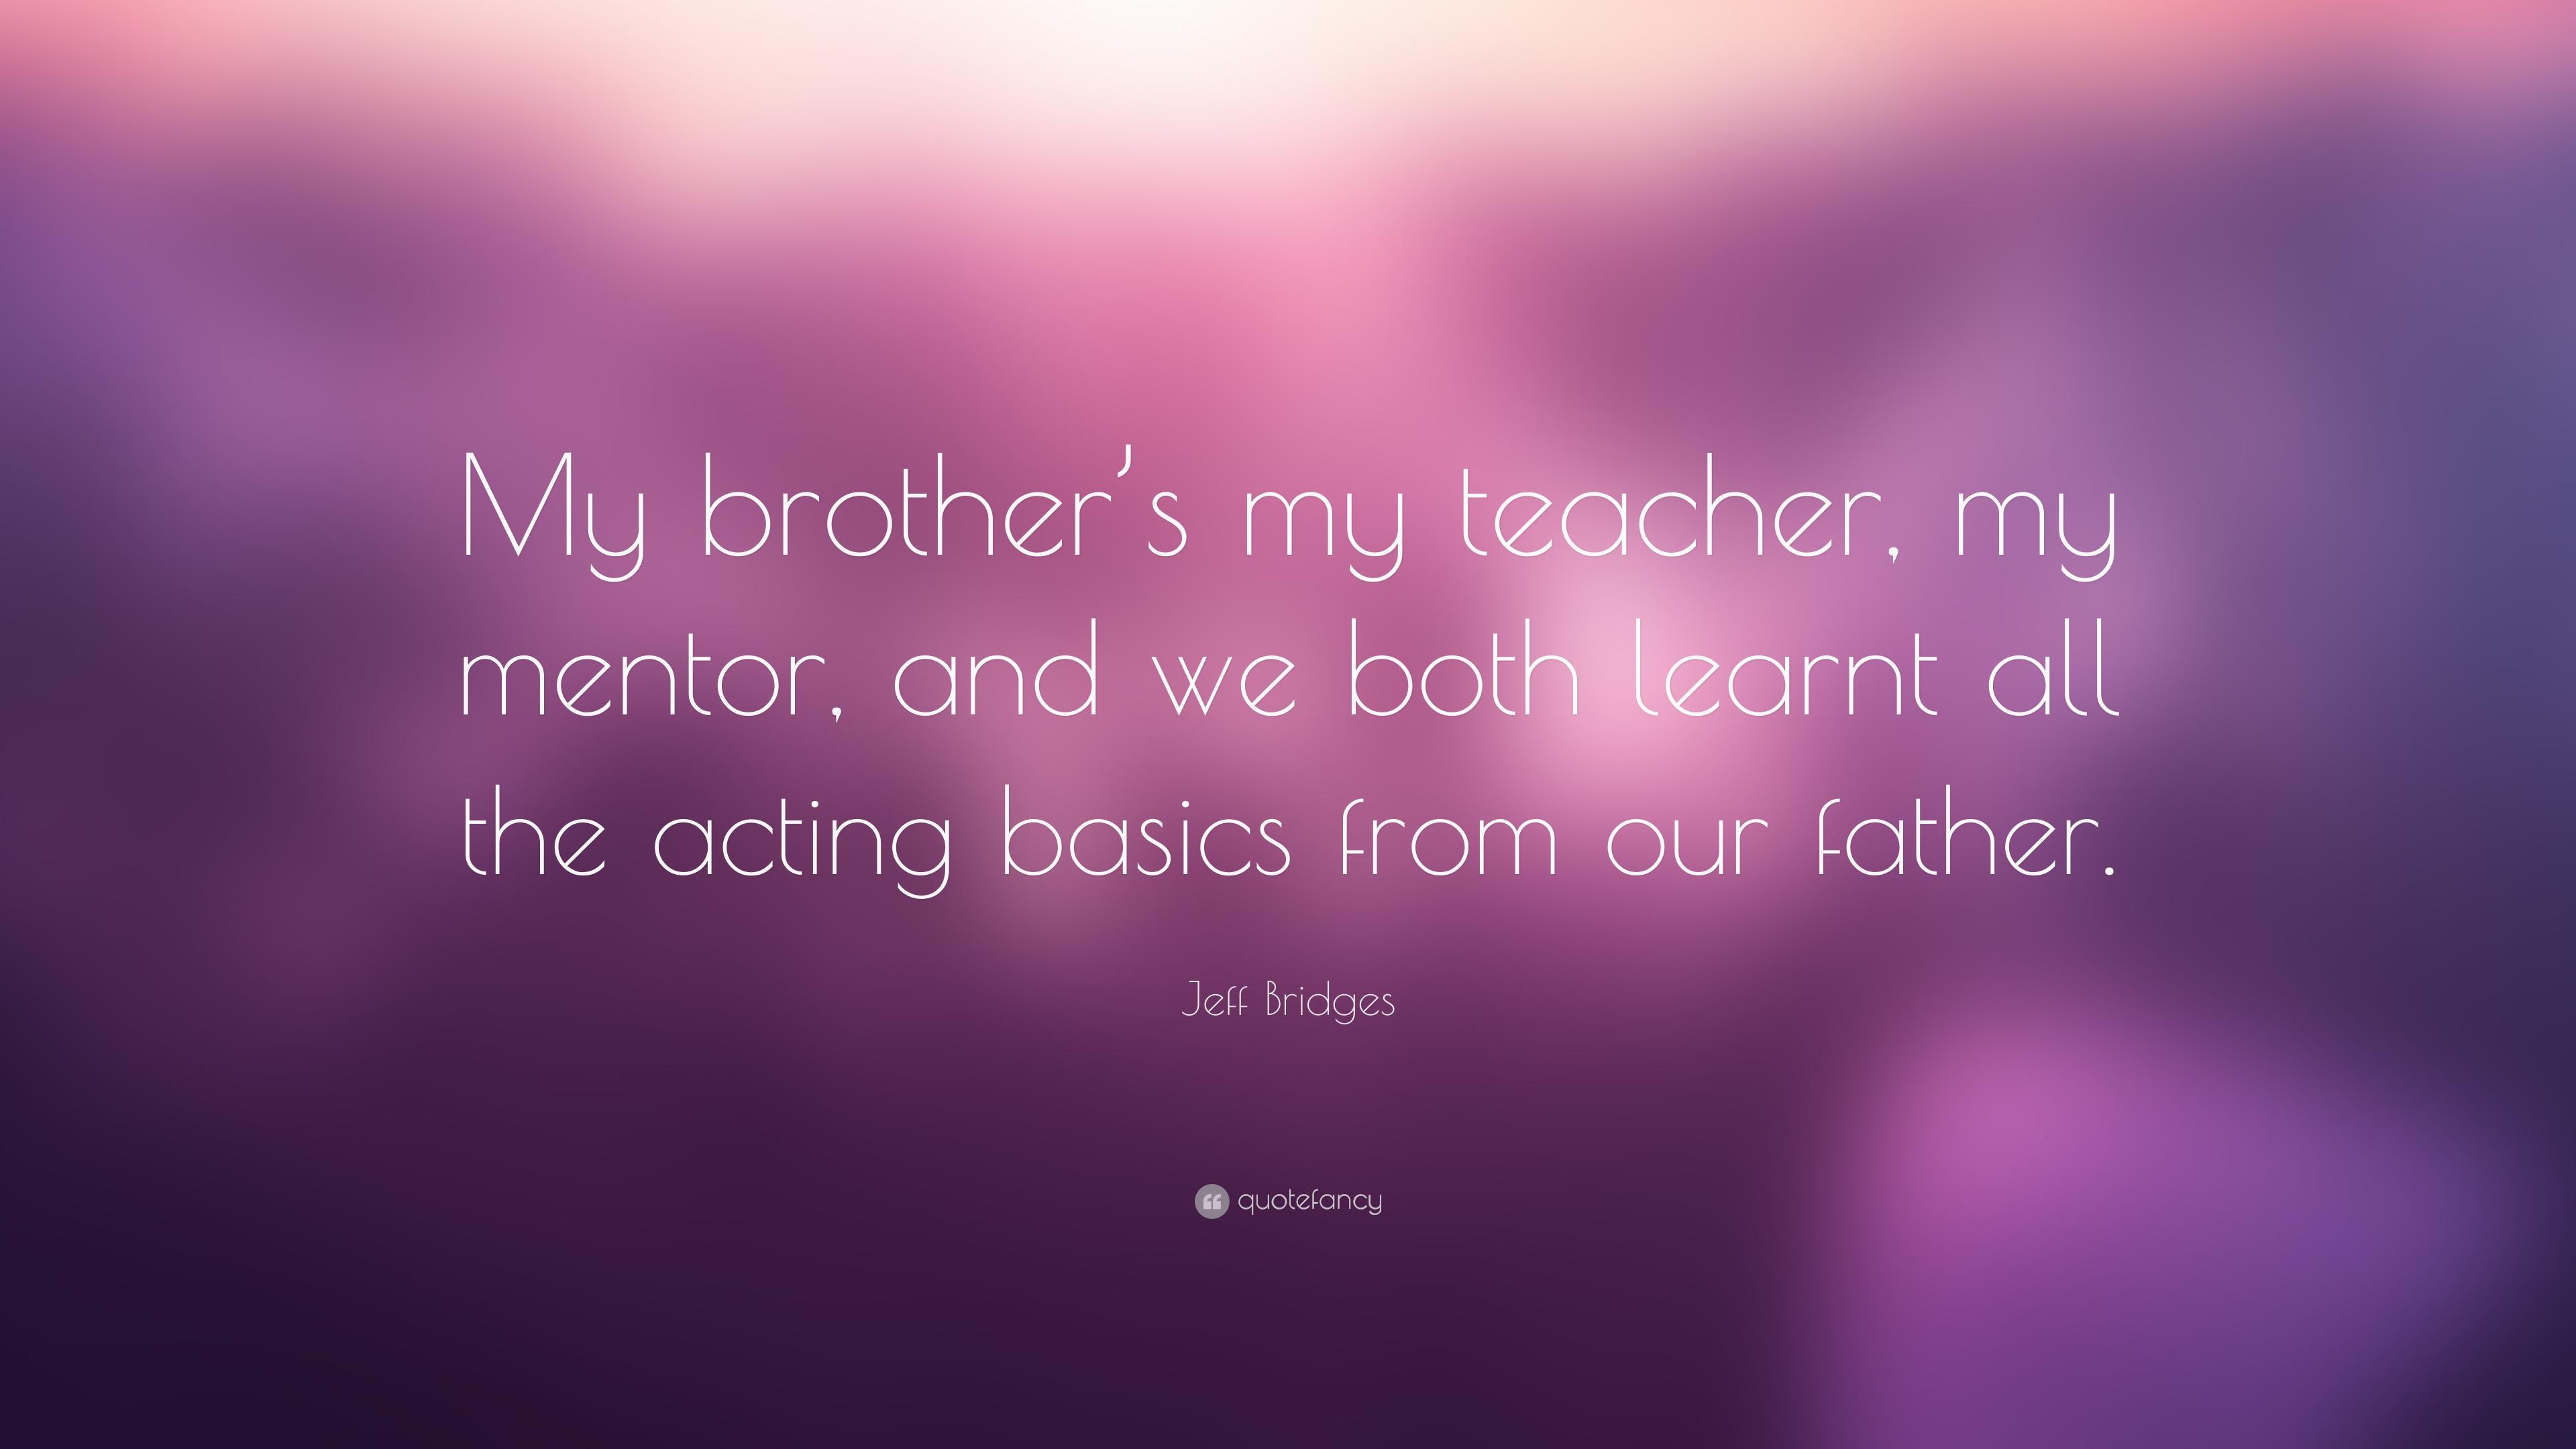 Jeff Bridges Quote: “My brother's my teacher, my mentor, and we both